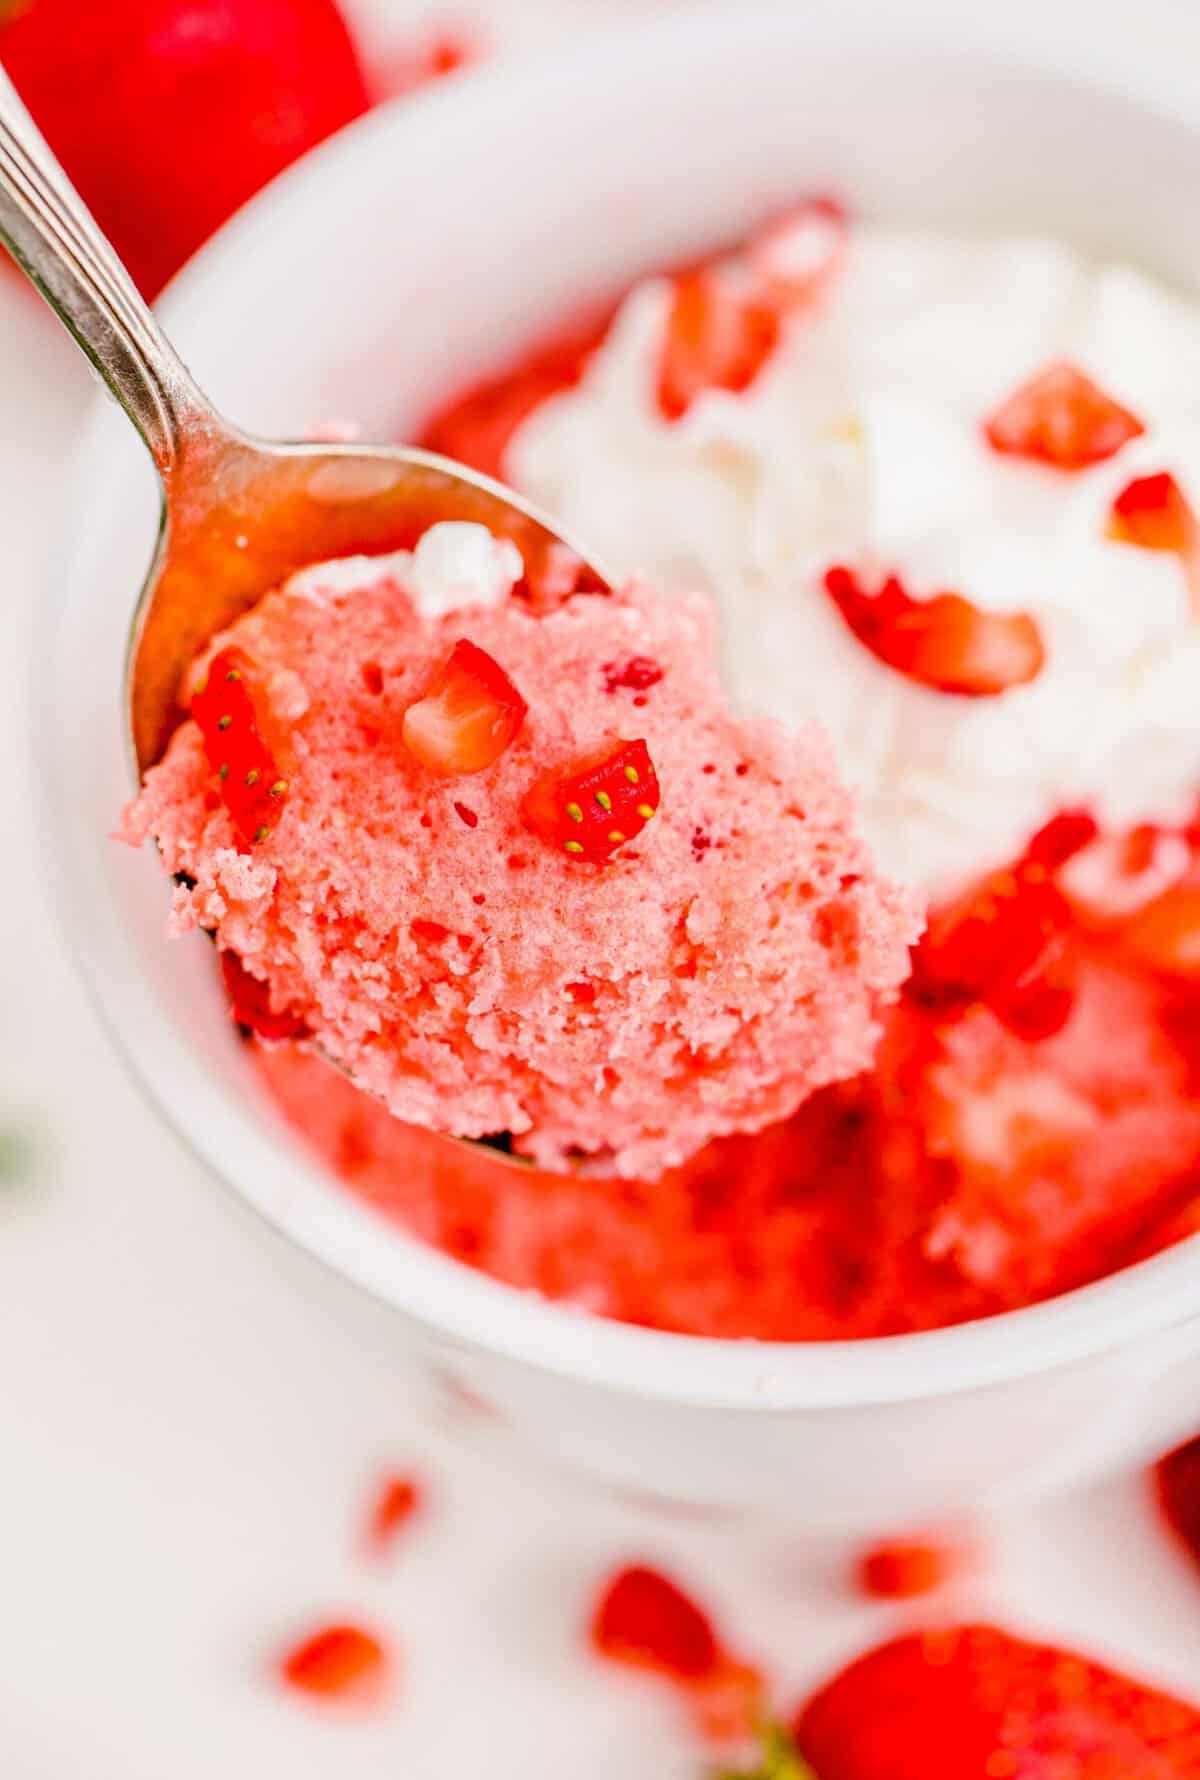 Spoonful of strawberry mug cake with diced strawberries